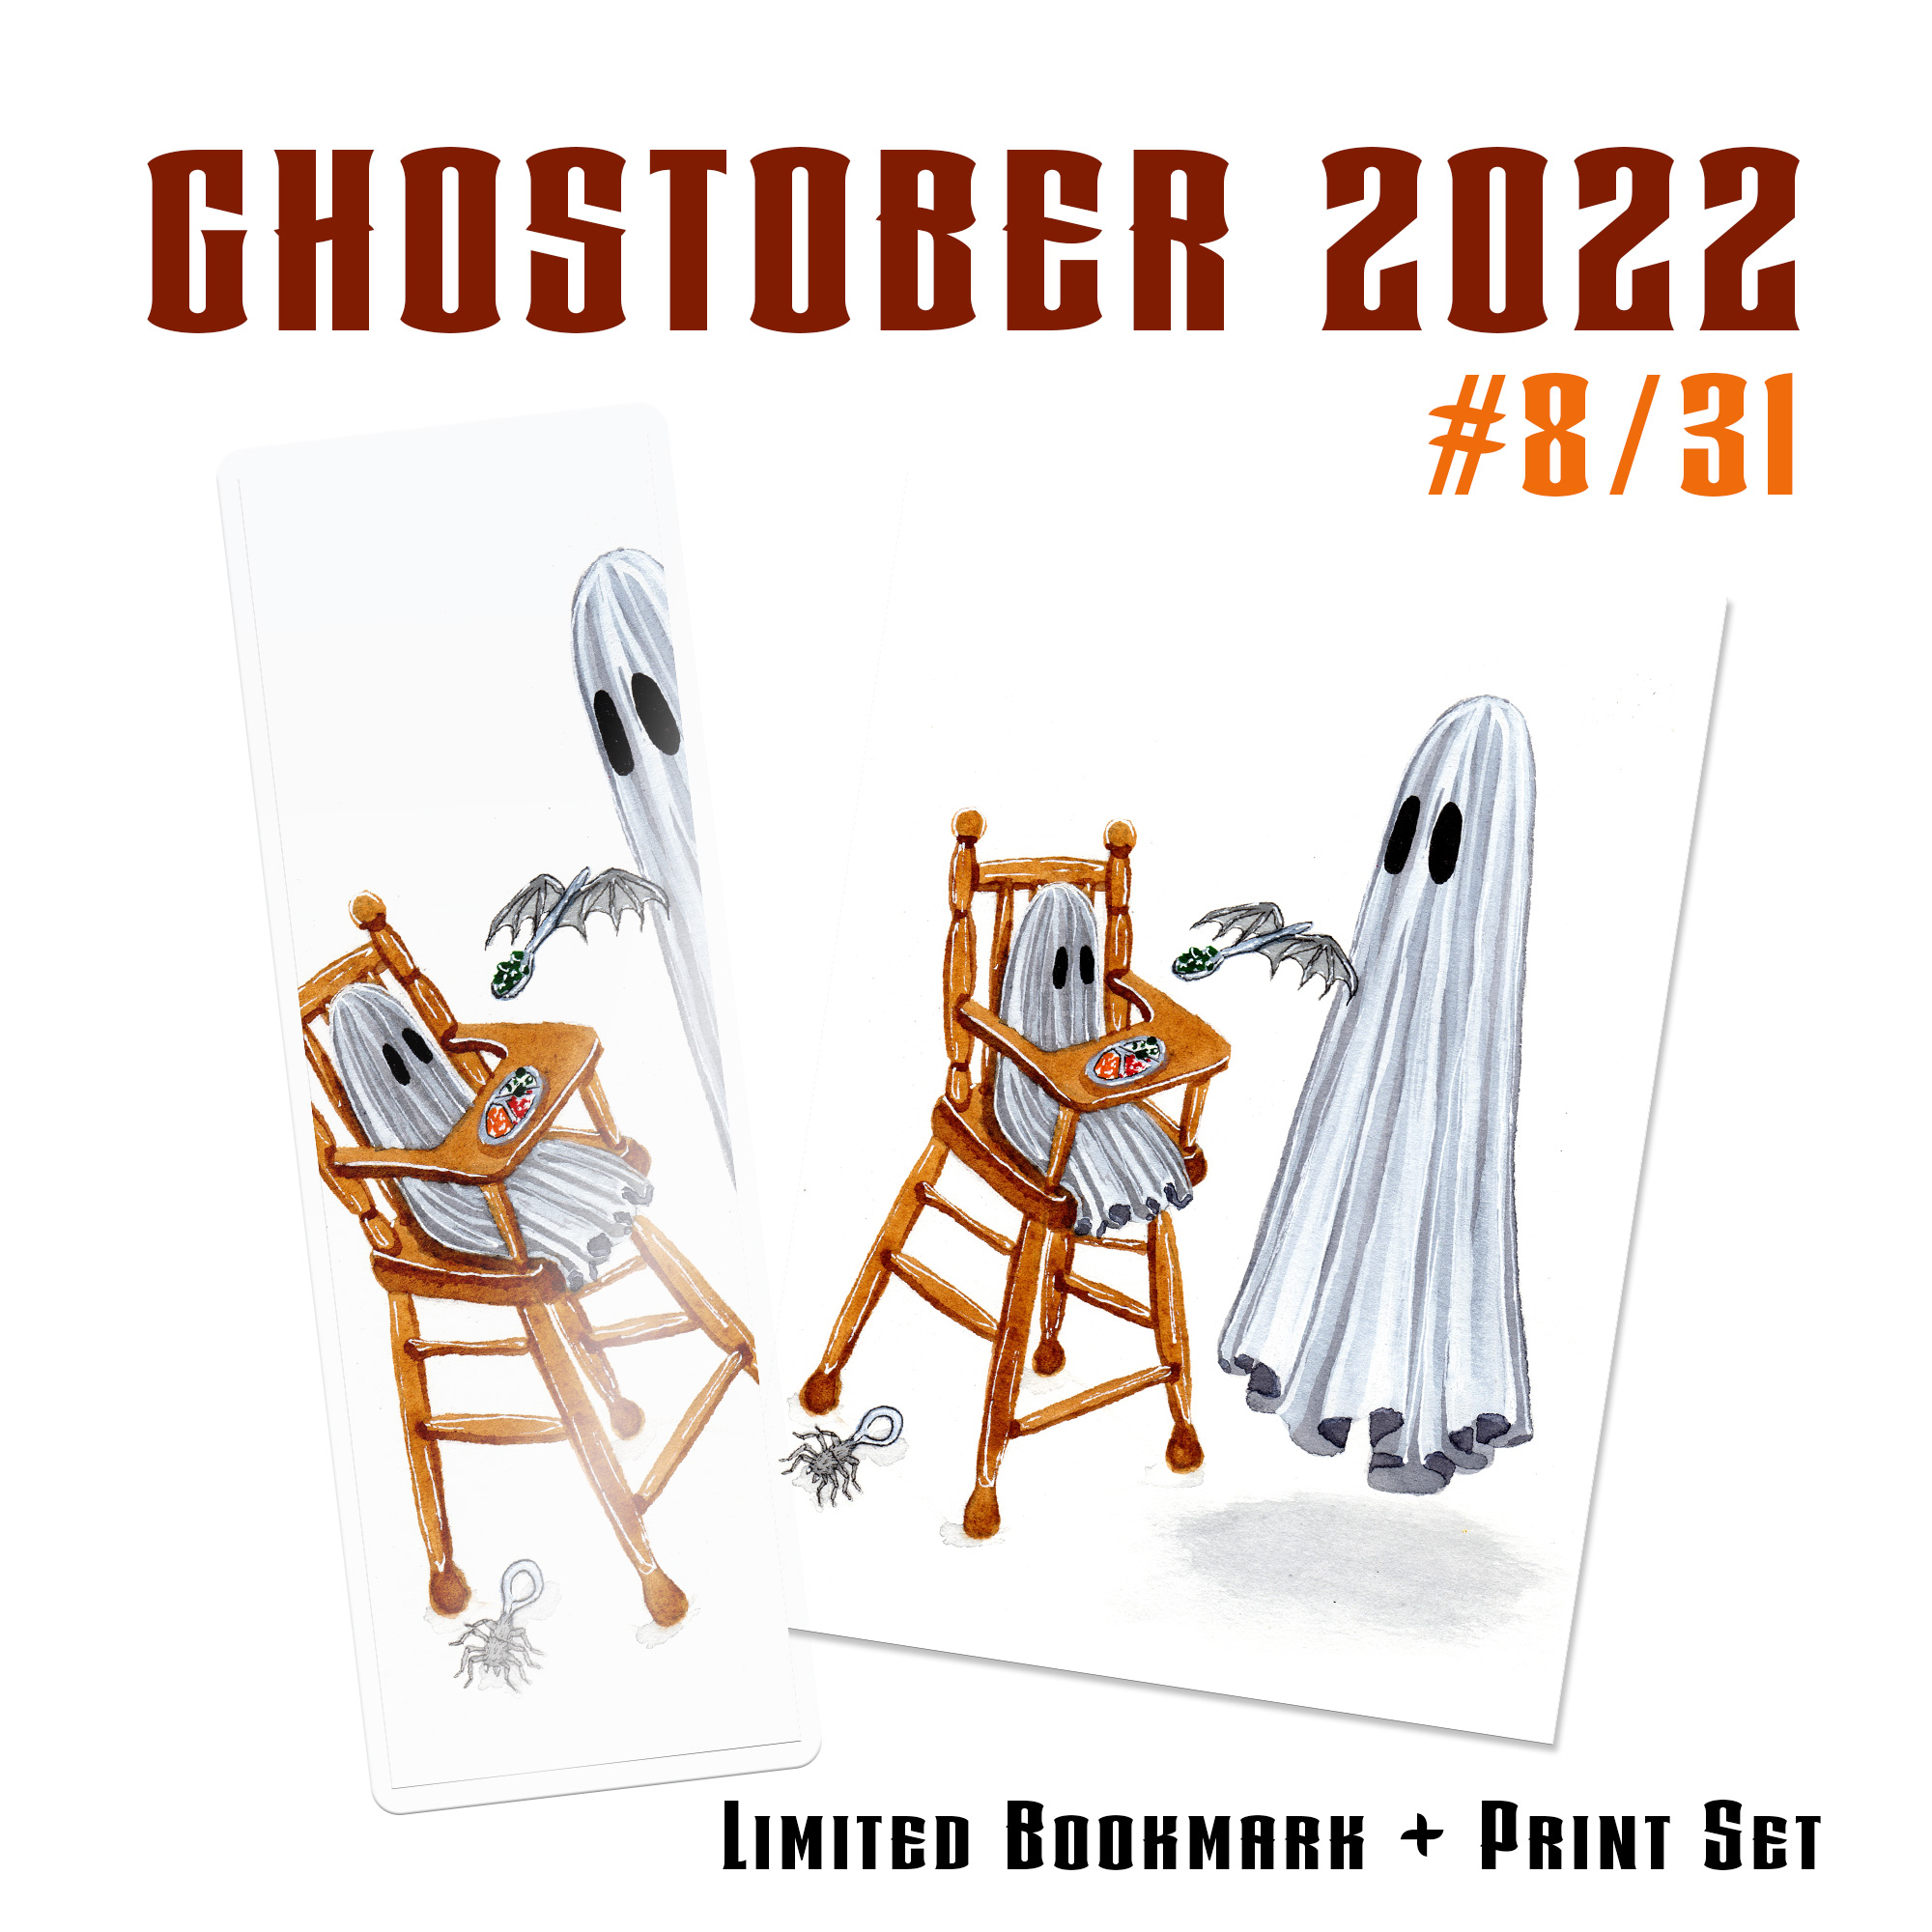 A limited edition print set featuring artwork from the Flukelady painting titled 'Ghost Baby' from her 2022 Ghostober Series.